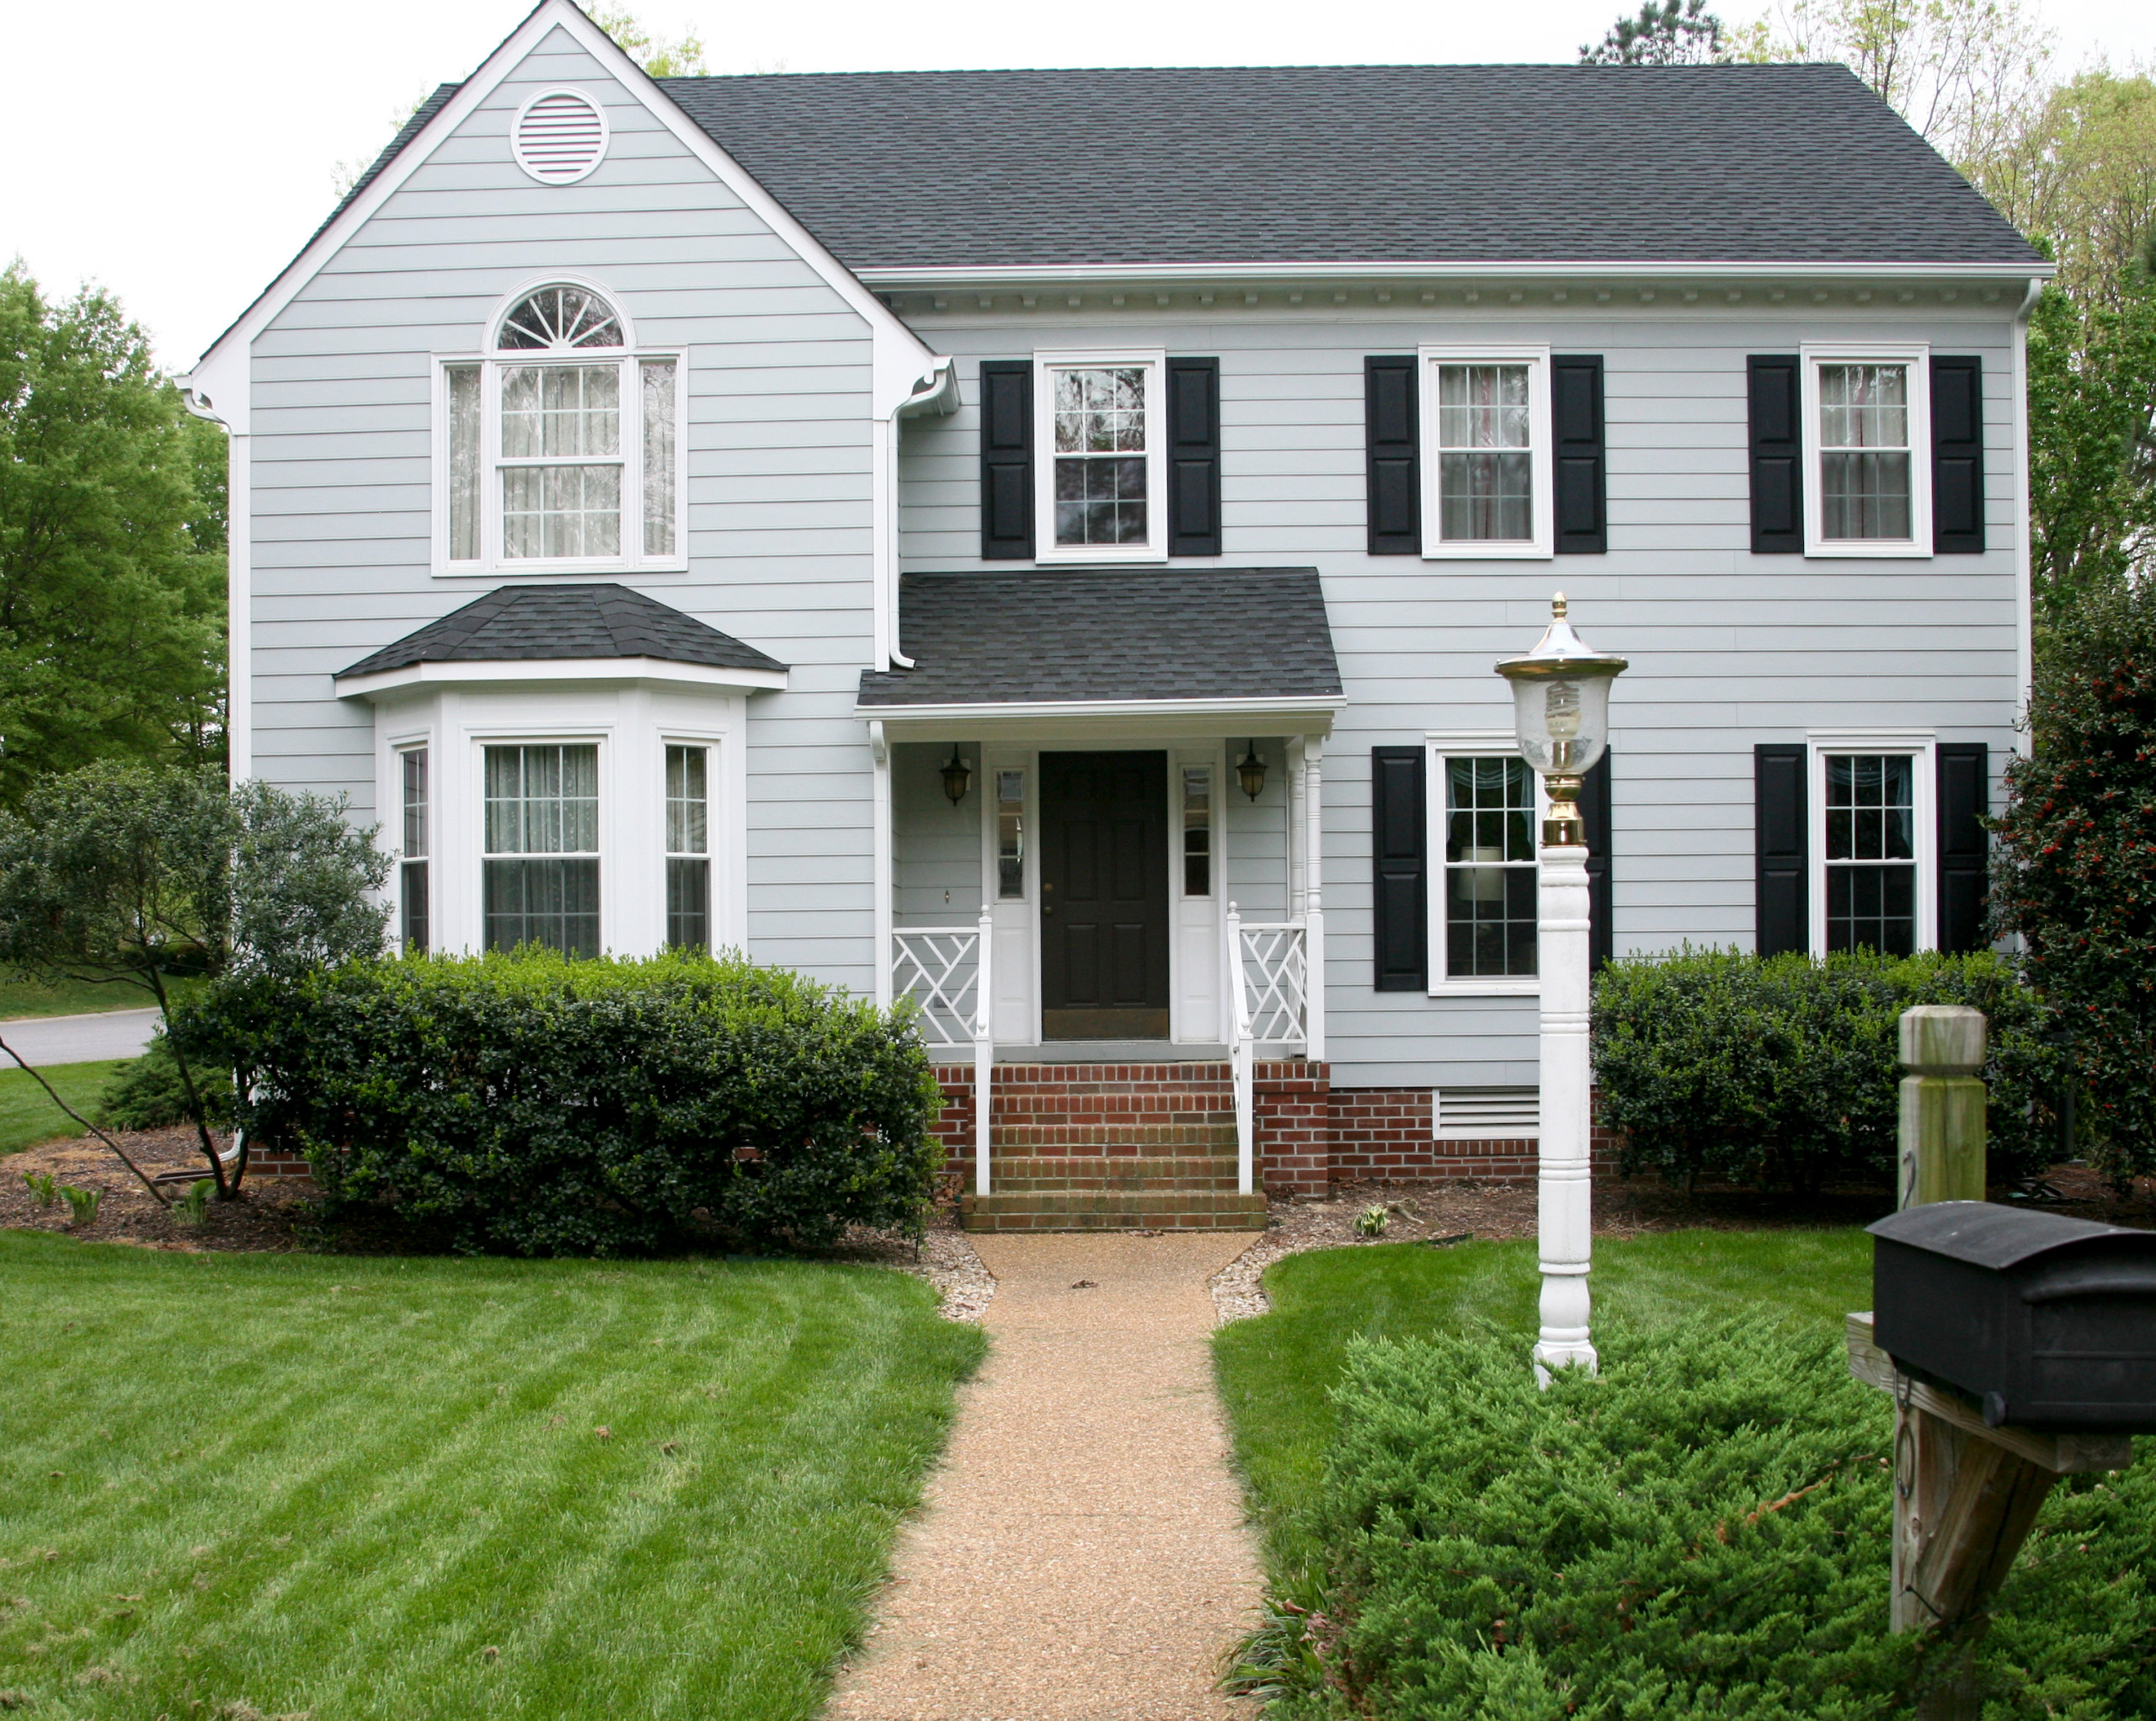 Light Blue Vinyl Siding - Traditional - Exterior - Richmond - by Jacobs  Ladder Siding, Roofing, Windows & Painting | Houzz